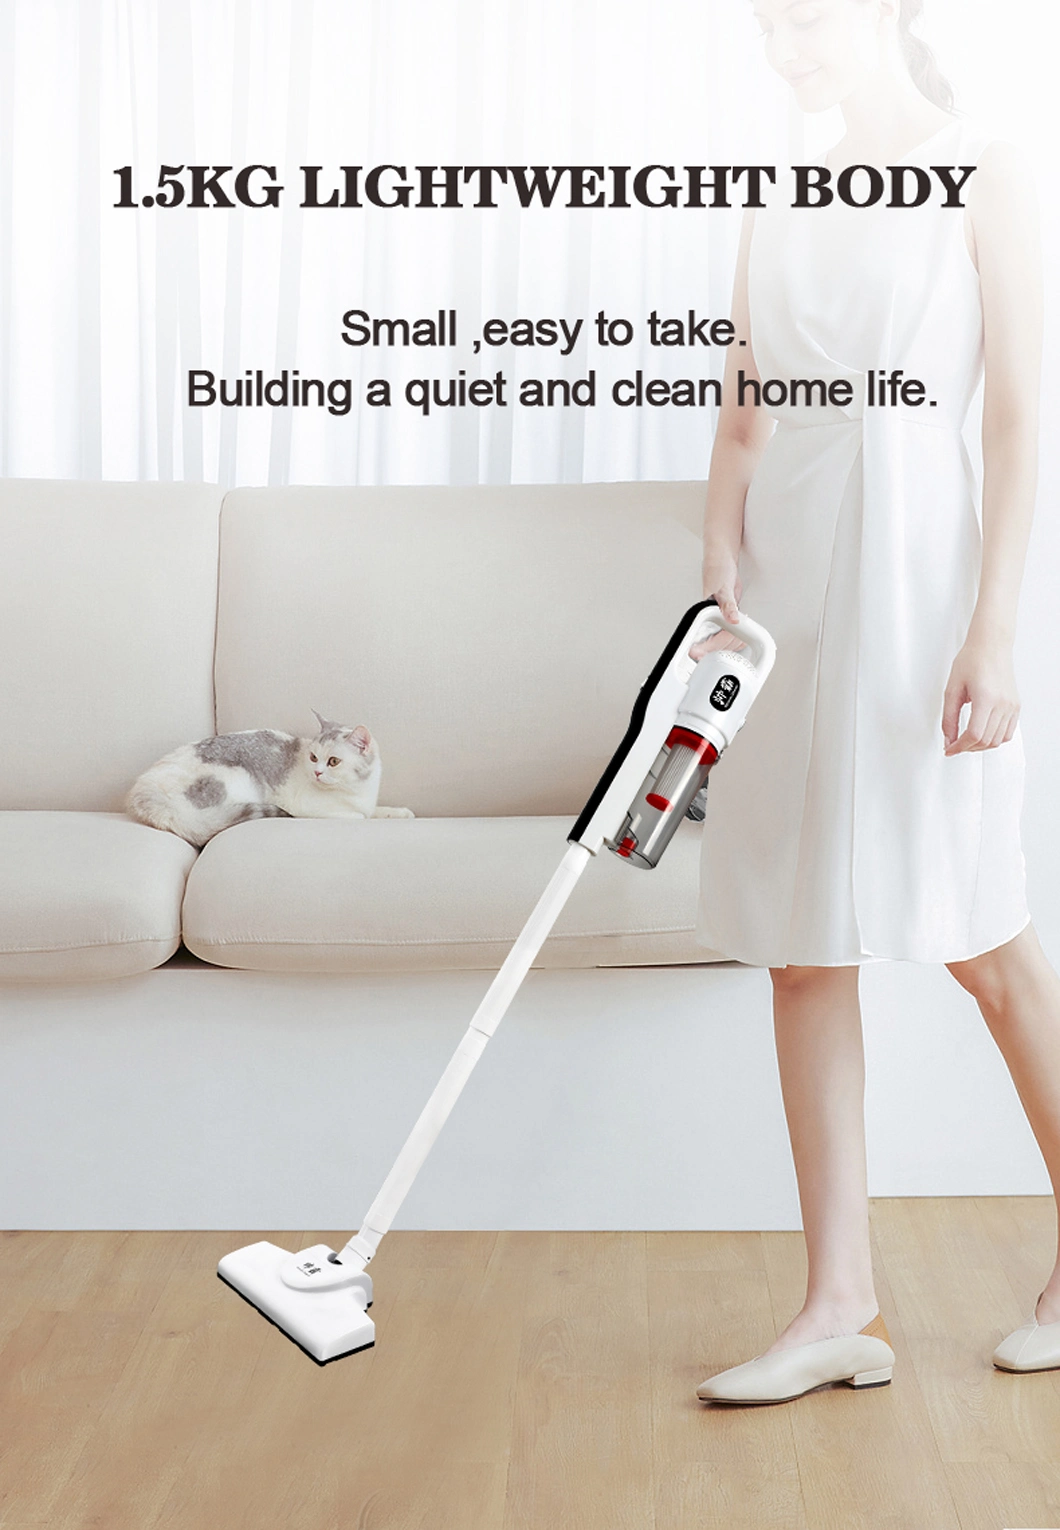 Home Aspirateur Bagless Cyclone Portable Rechargeable Handheld Wireless Cordless Floor Vacuum Cleaner